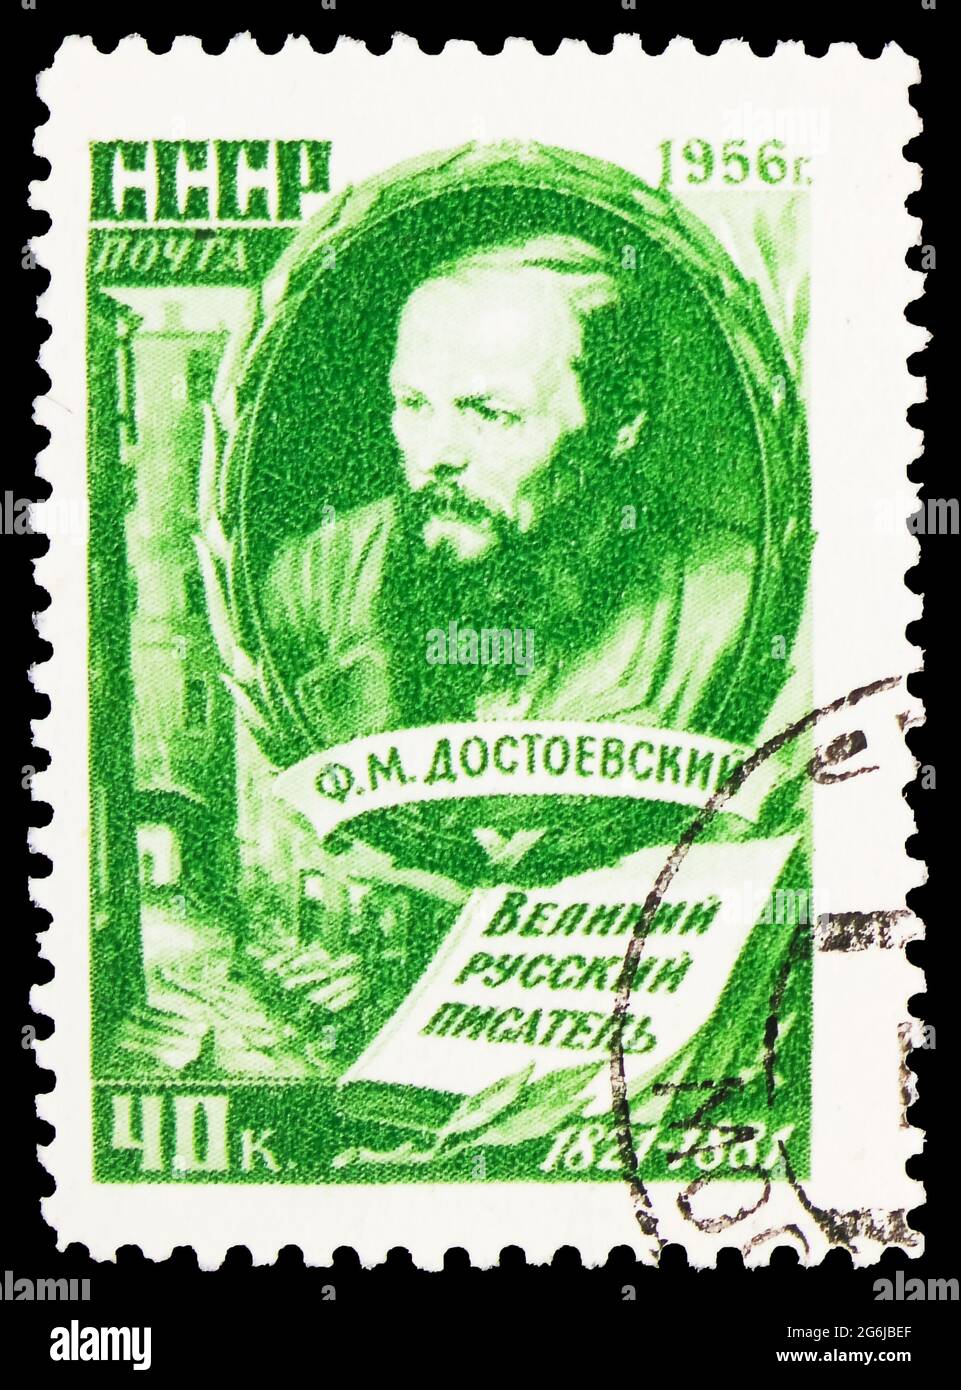 MOSCOW, RUSSIA - MARCH 21, 2020: Postage stamp printed in Soviet Union shows Fyodor M. Dostoevsky (1821-1881), Russian writer, Great Figures of World Stock Photo